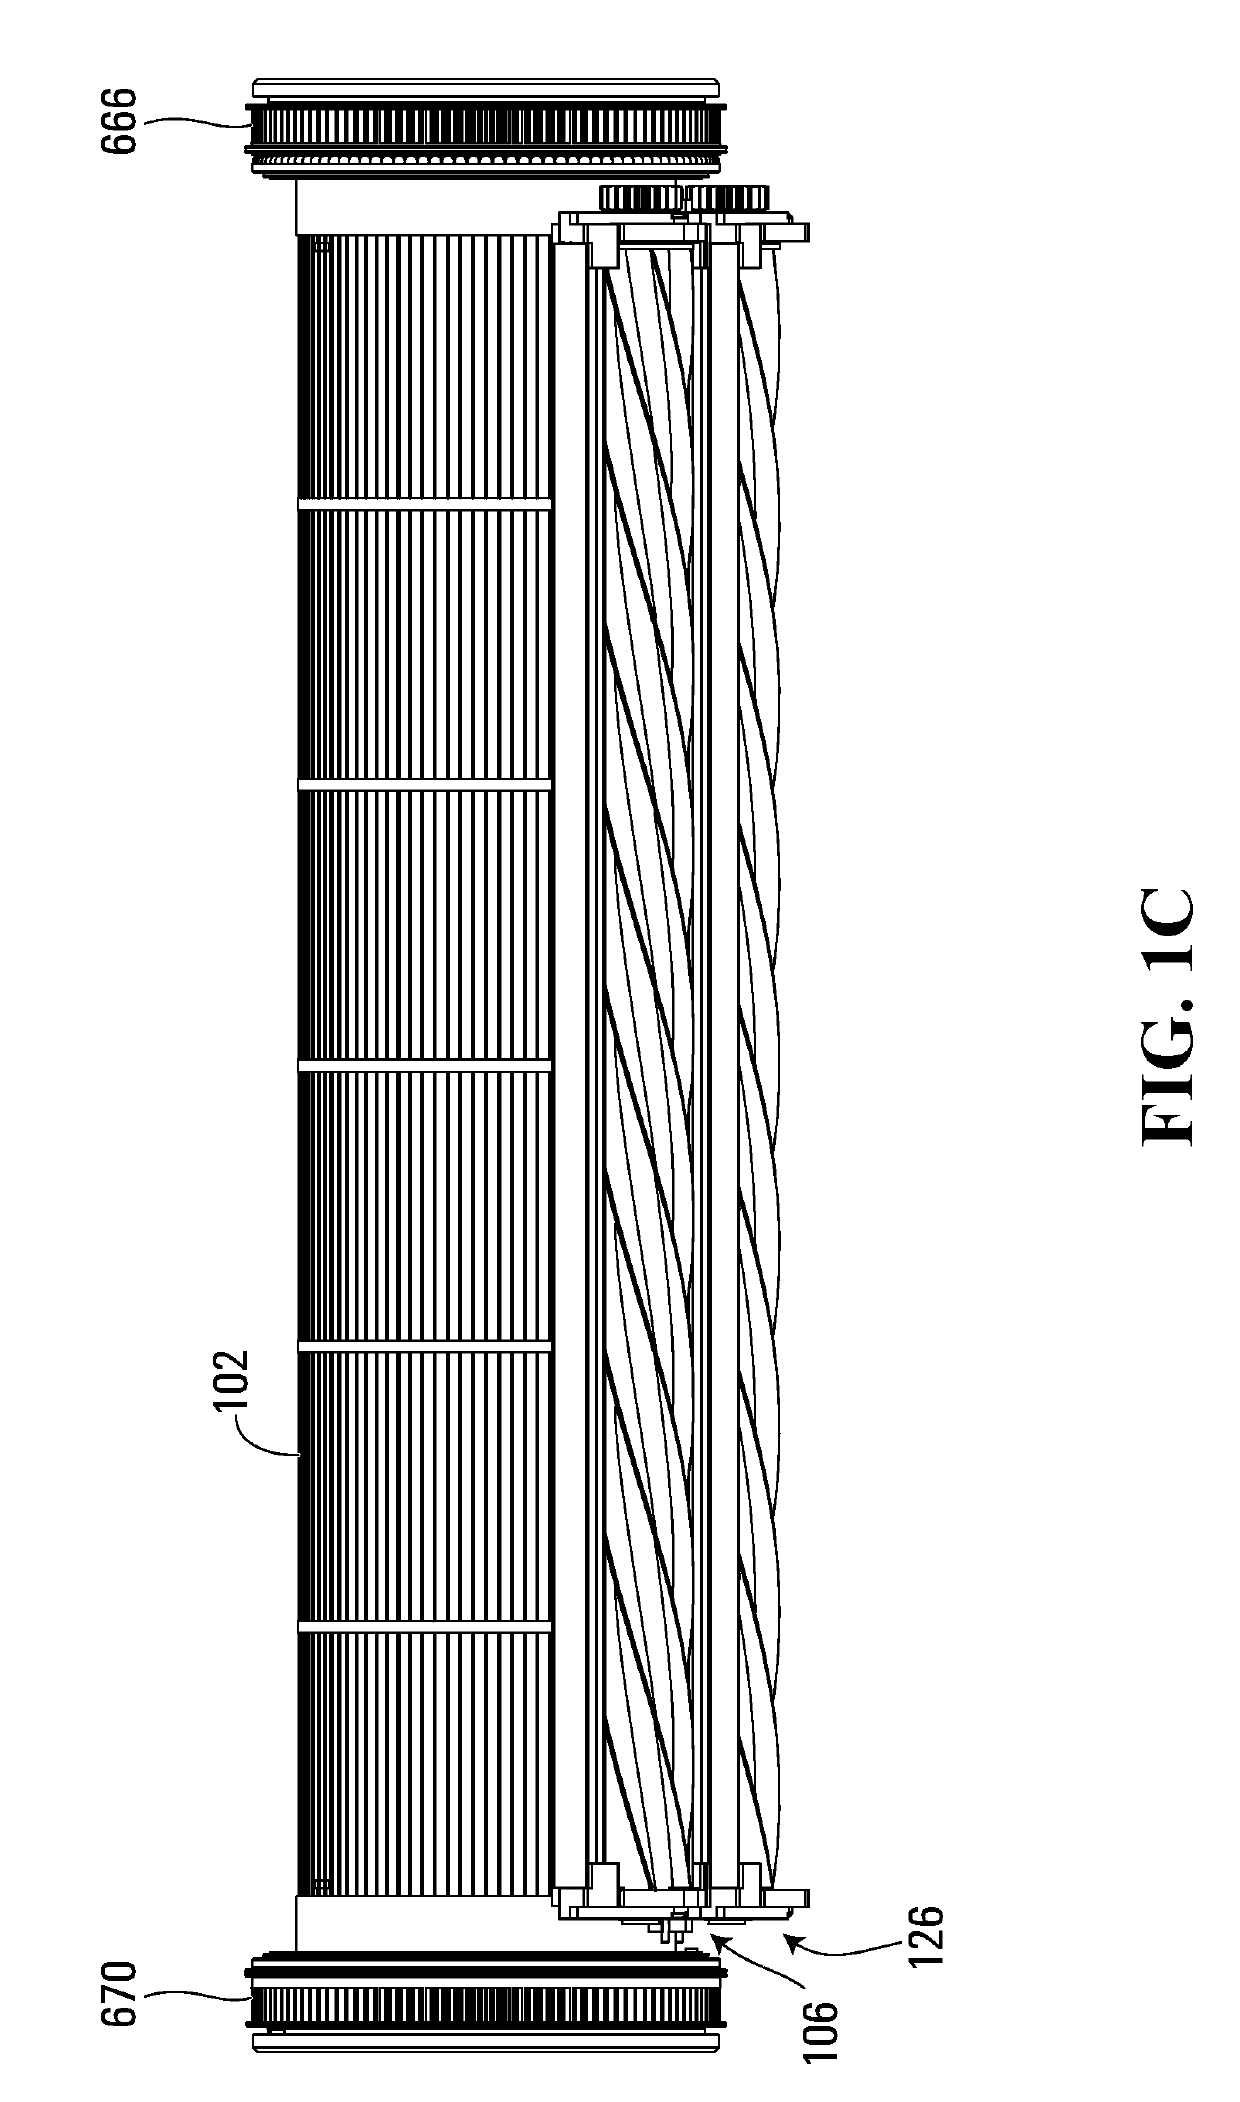 Plant trimming apparatus and methods